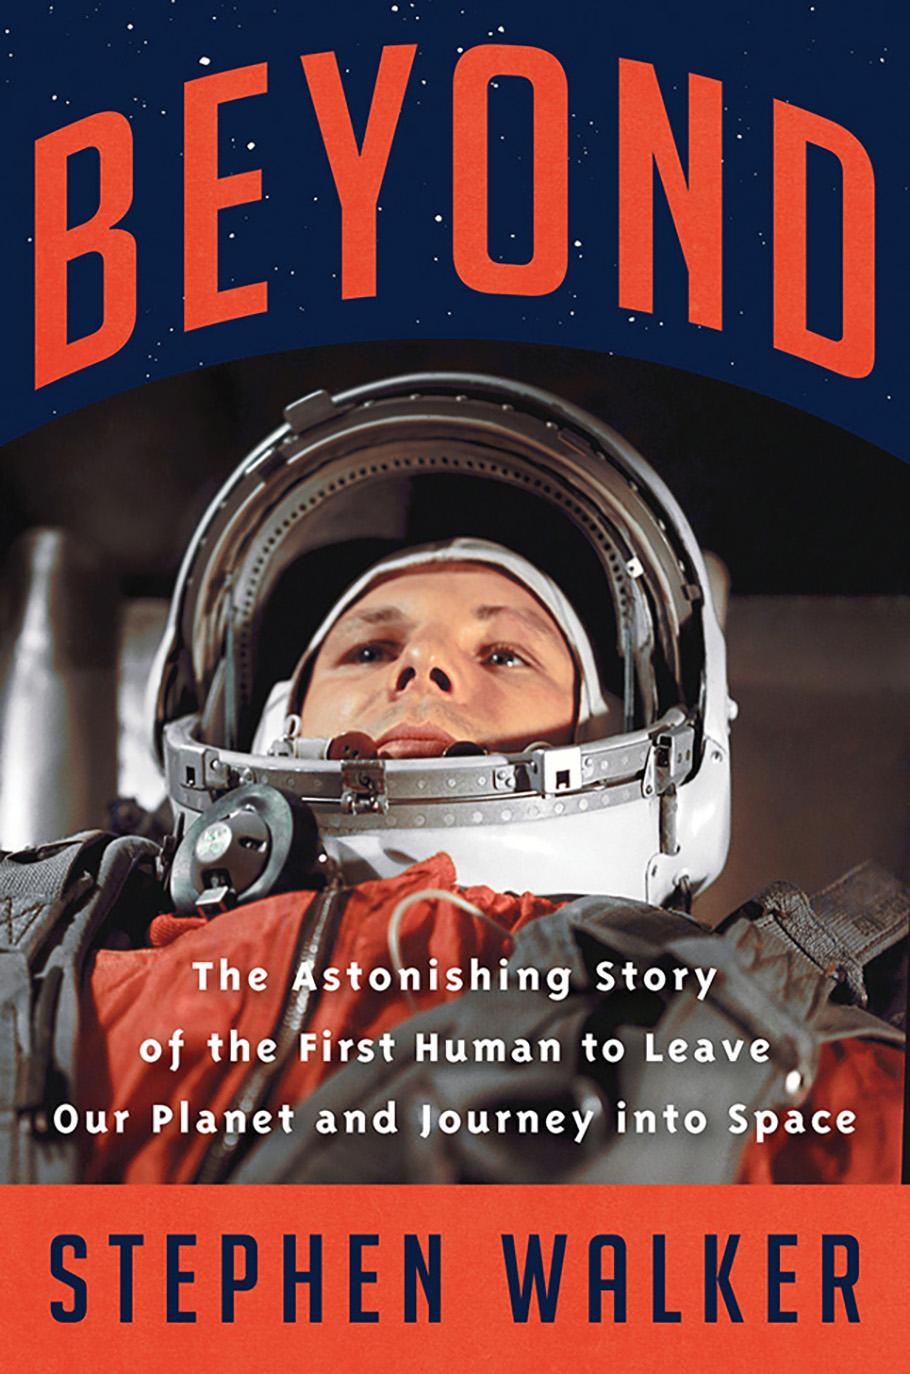 A book cover that reads "Beyond: The Astonishing Story of the First Human to Leave Our Planet and Journey into Space."